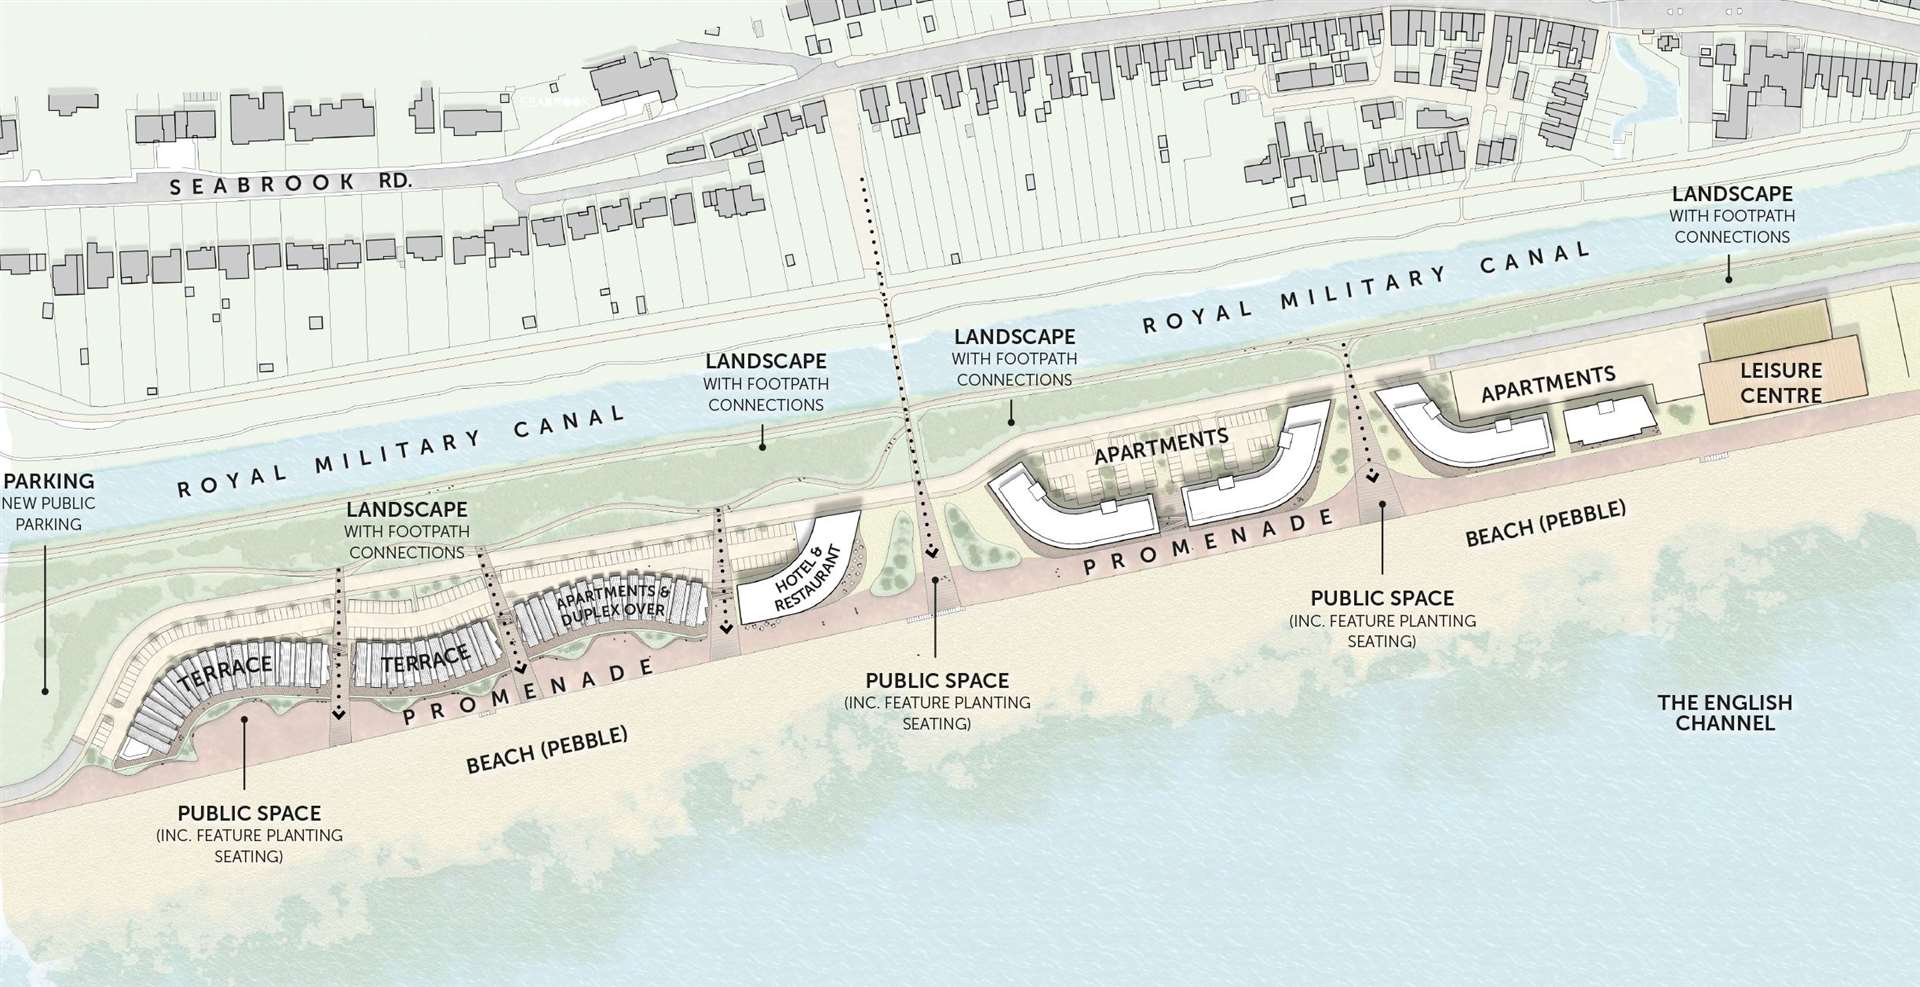 The layout of the proposed development at Princes Parade - with the road moved away from the seafront